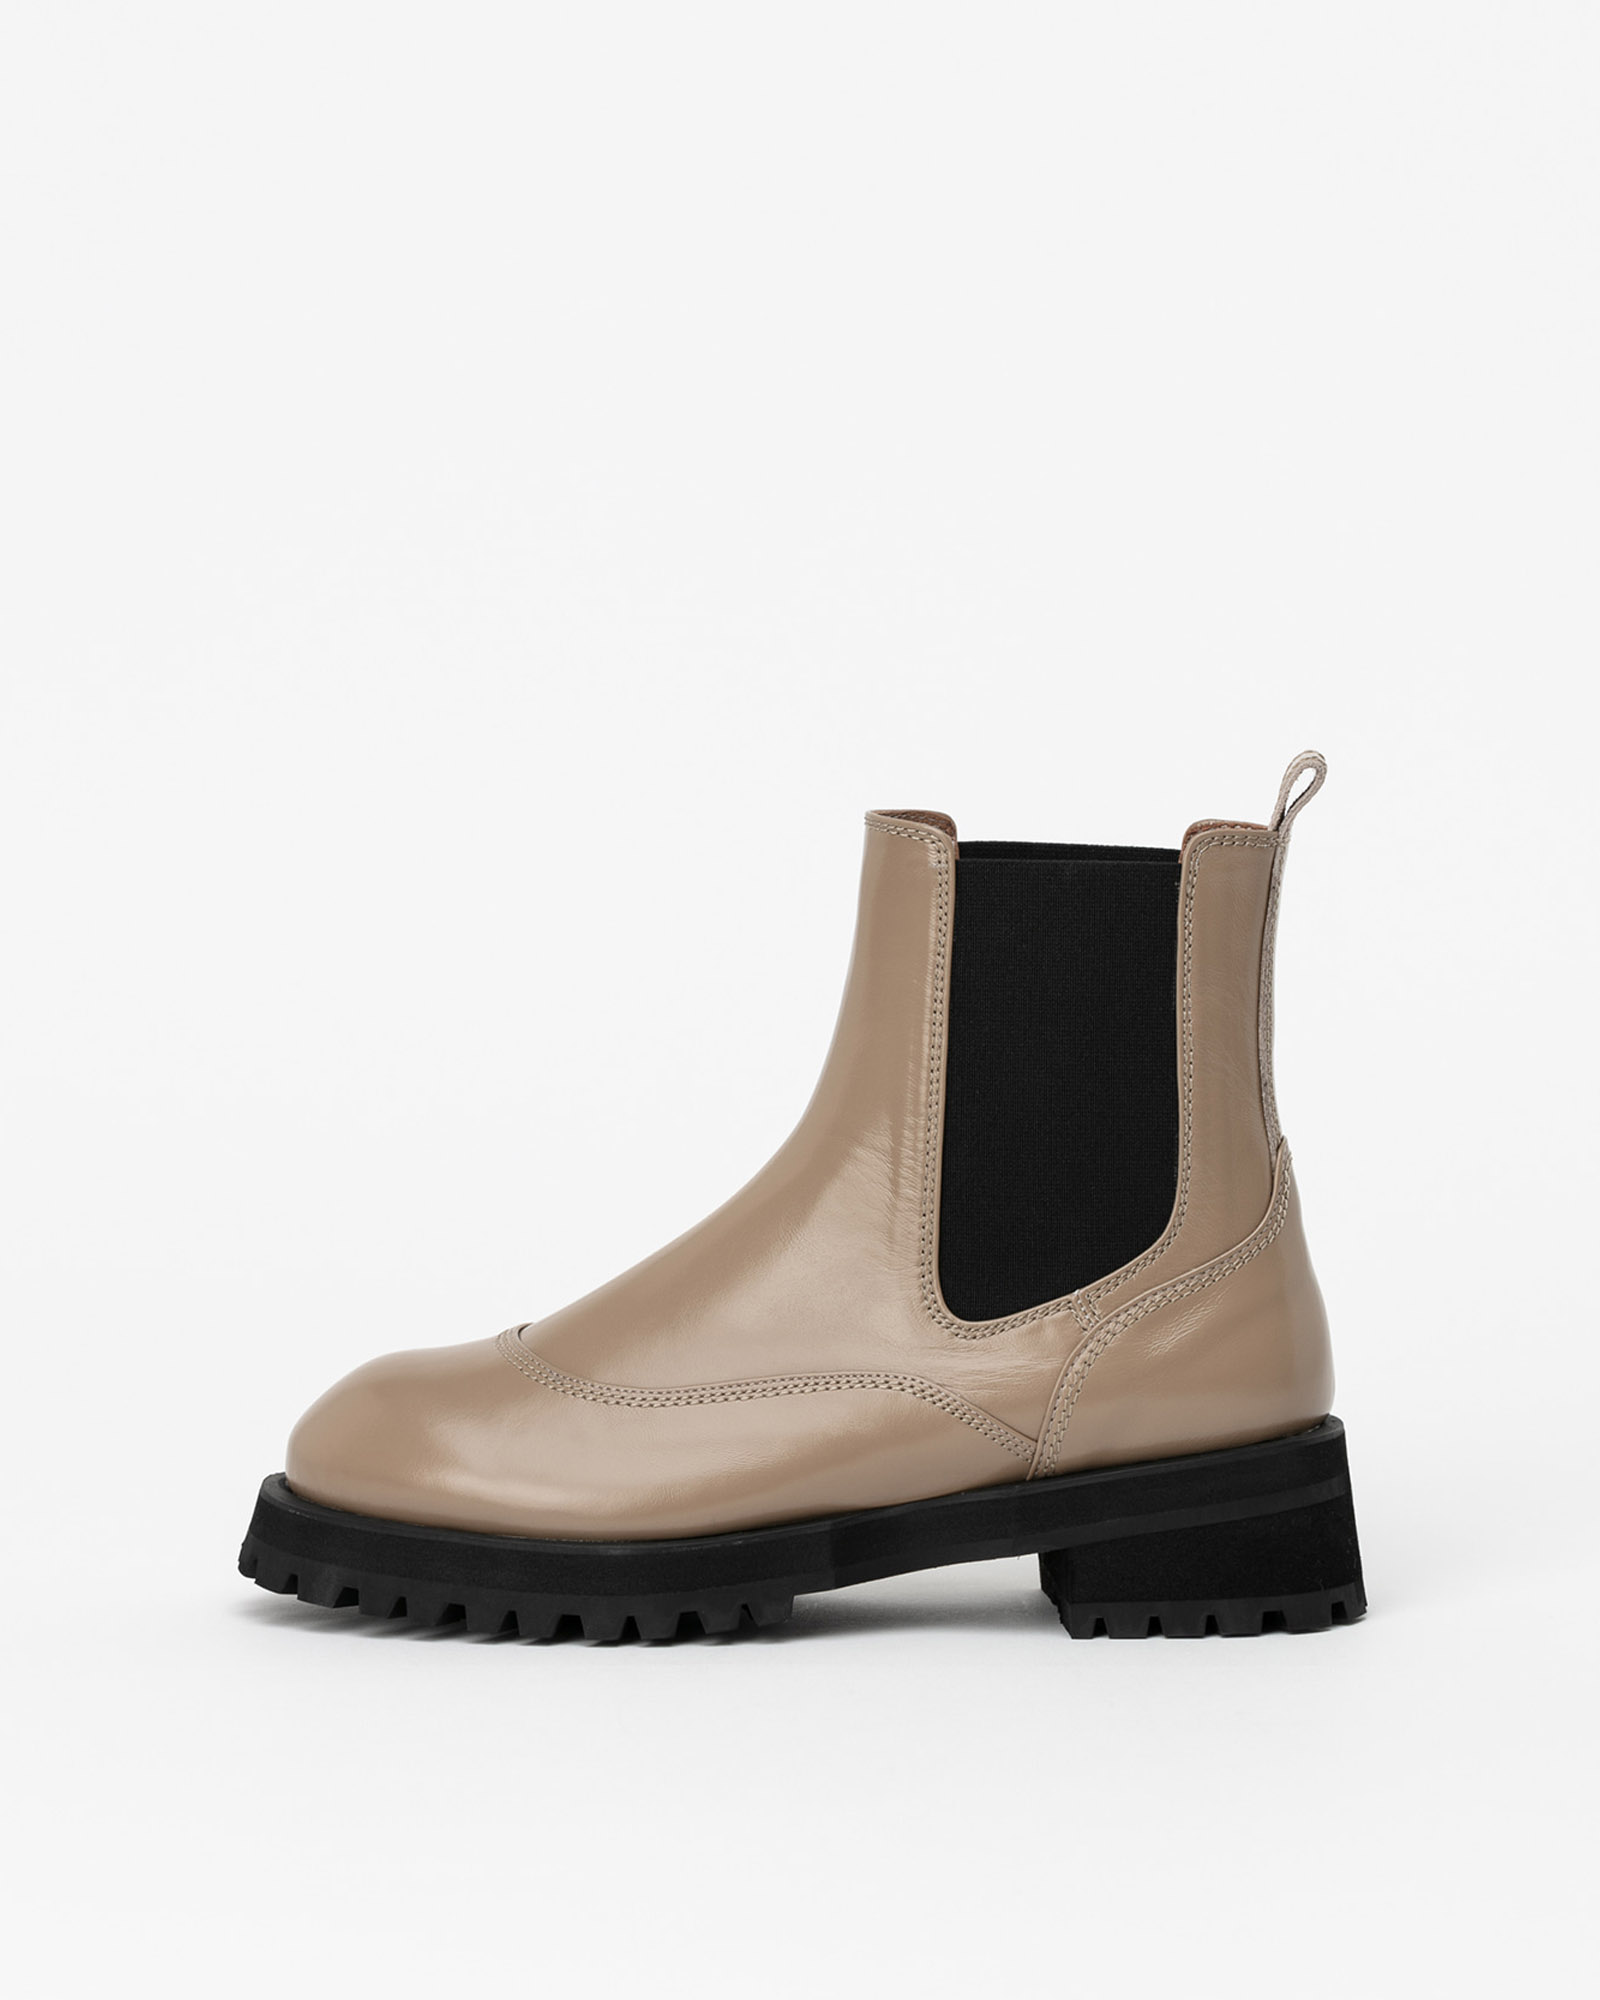 Defini Lugsole Chelsea Boots in Textured Beige